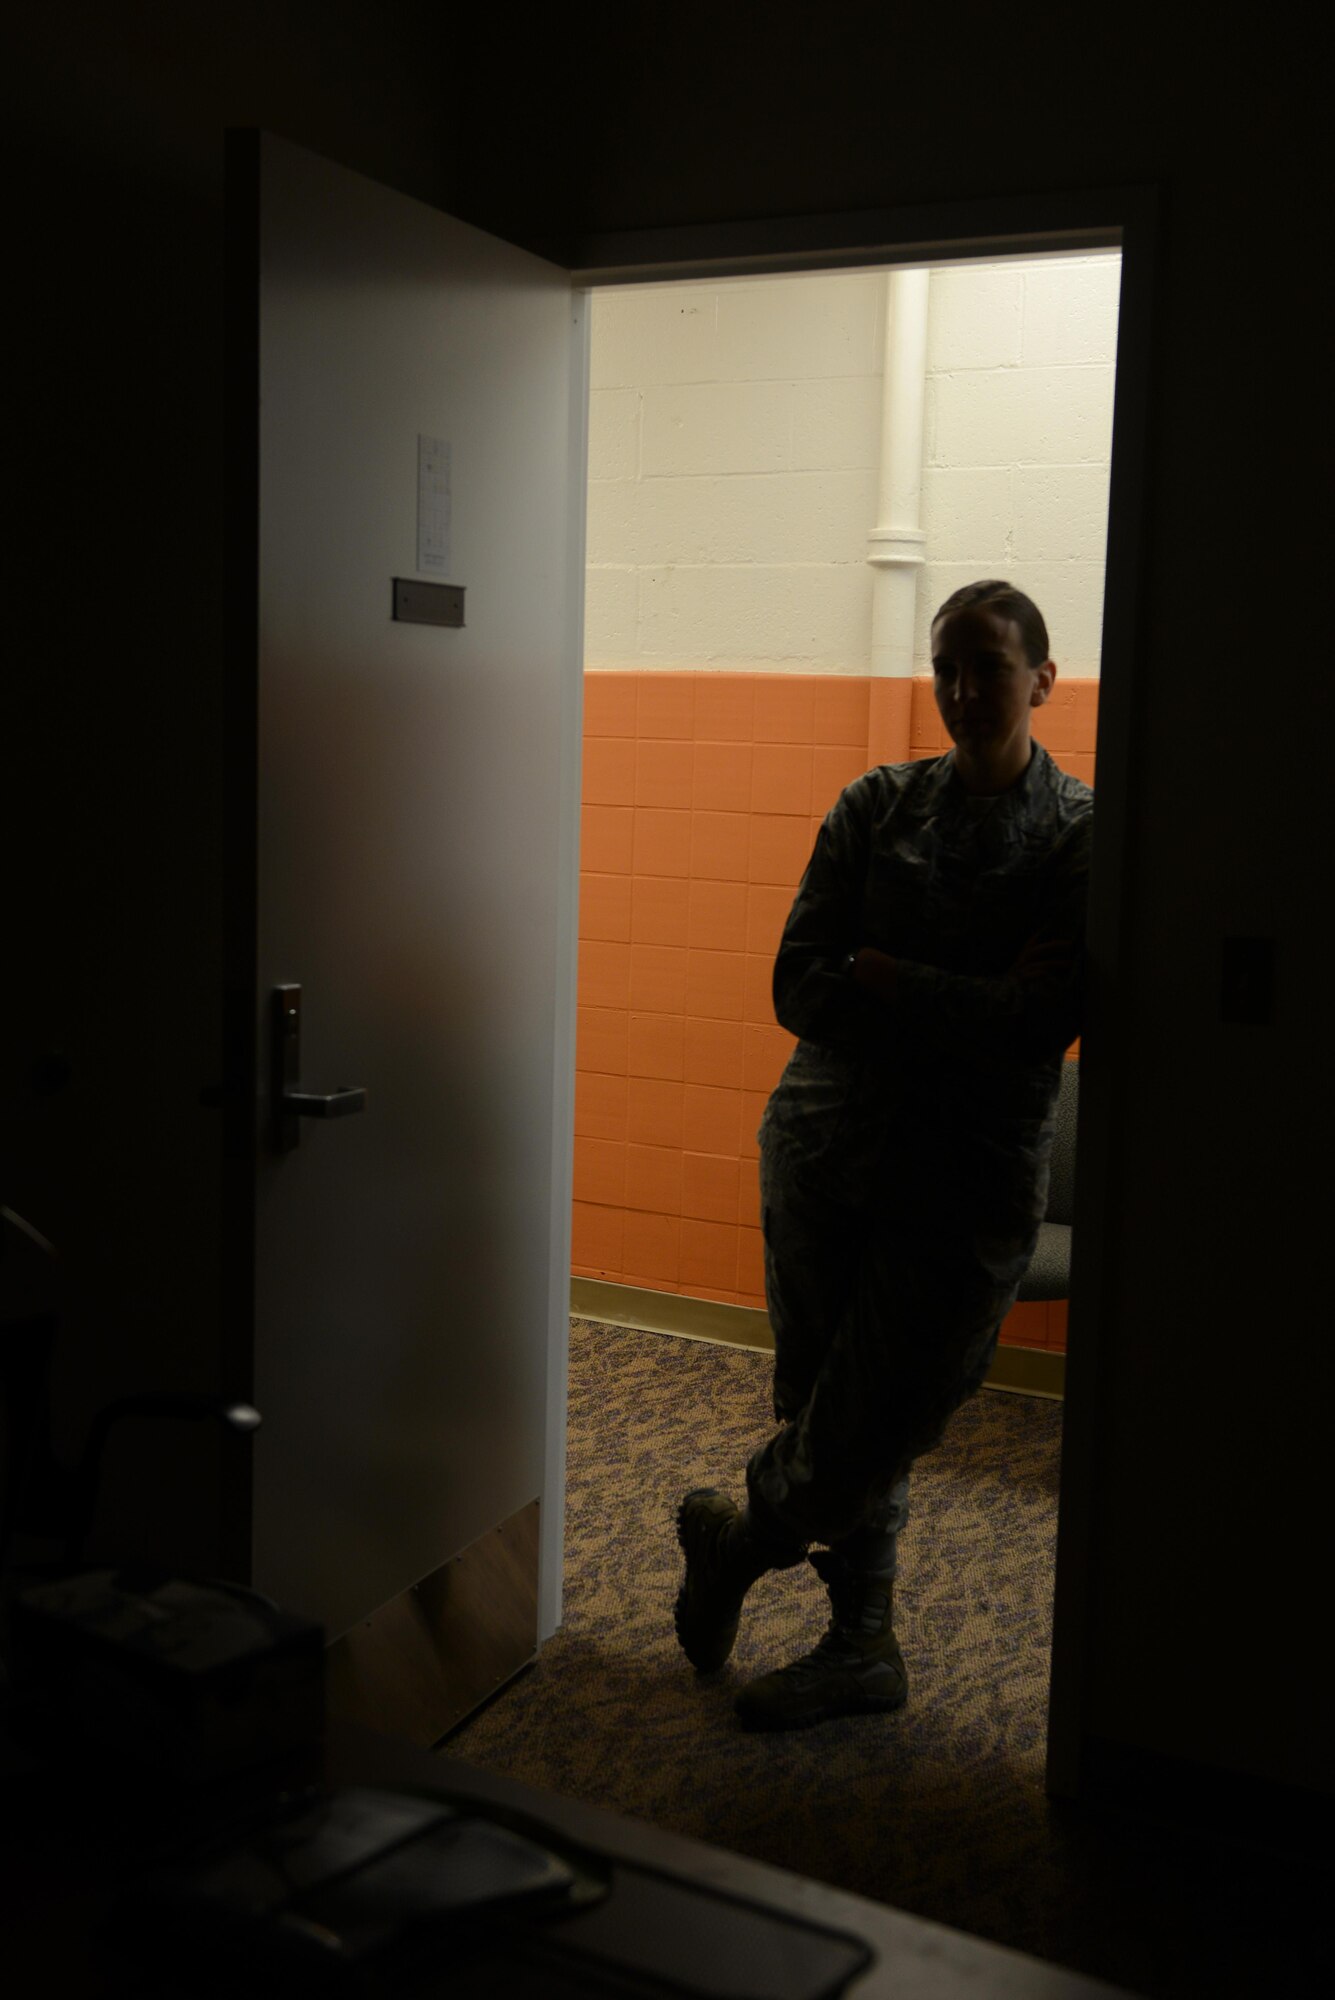 Technical Sgt. Jessica Tabor, 673d Equal Opportunity noncommissioned officer in charge, looks inside her late supervisor’s room at Joint Base Elmendorf-Richardson, Alaska, Dec. 29, 2016. About six months ago, EO lost their superintendent and the office is still recovering; the room remains unoccupied. 